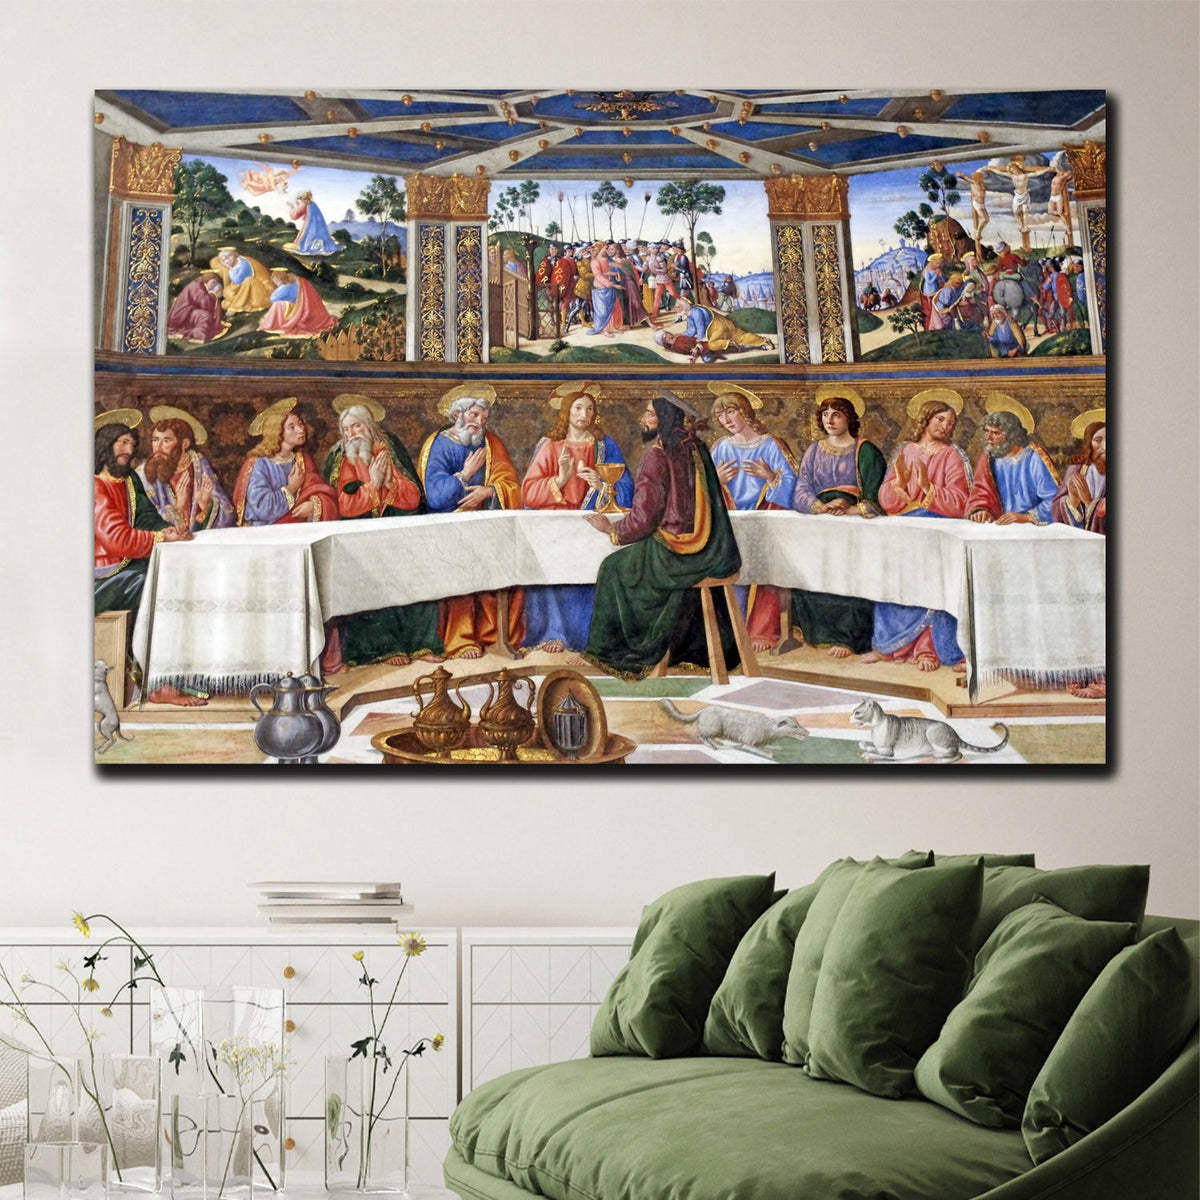 https://cdn.shopify.com/s/files/1/0387/9986/8044/products/TheLastSupperofChristCanvasArtprintStretched-4.jpg